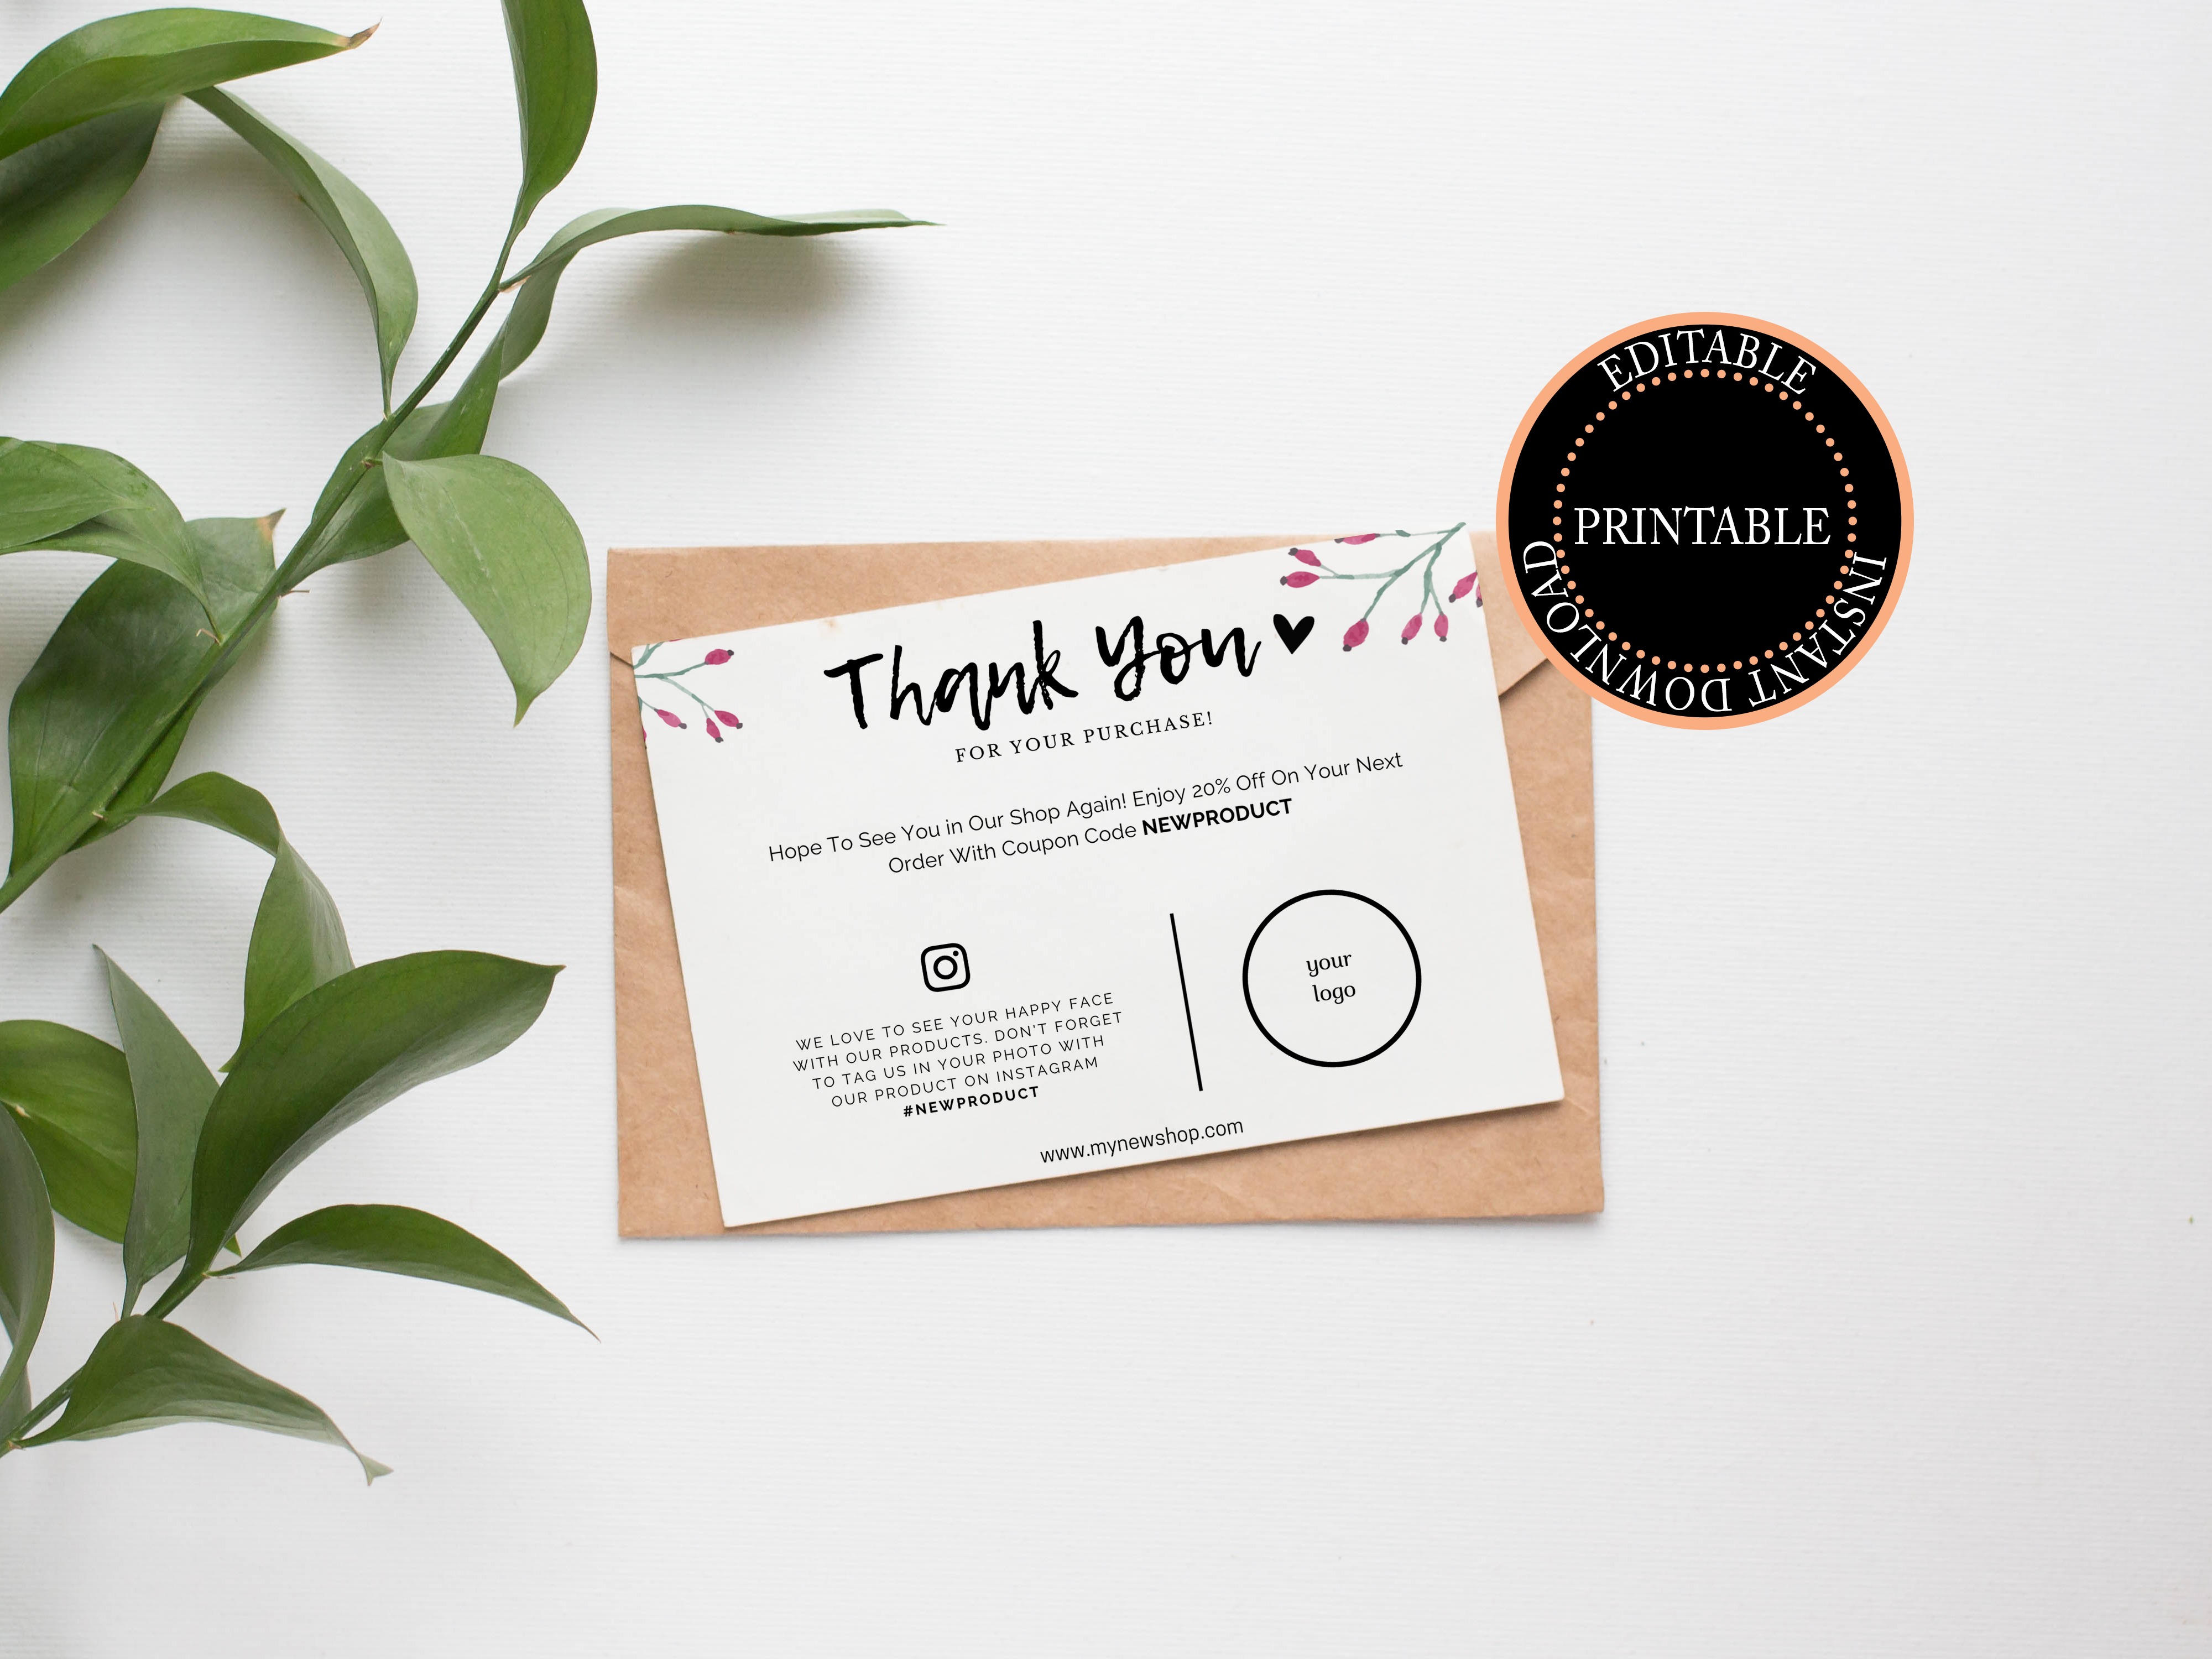 Editable Business Thank You Note Template | Printable Thank You Card - $ 4.50 | Digiprints Store